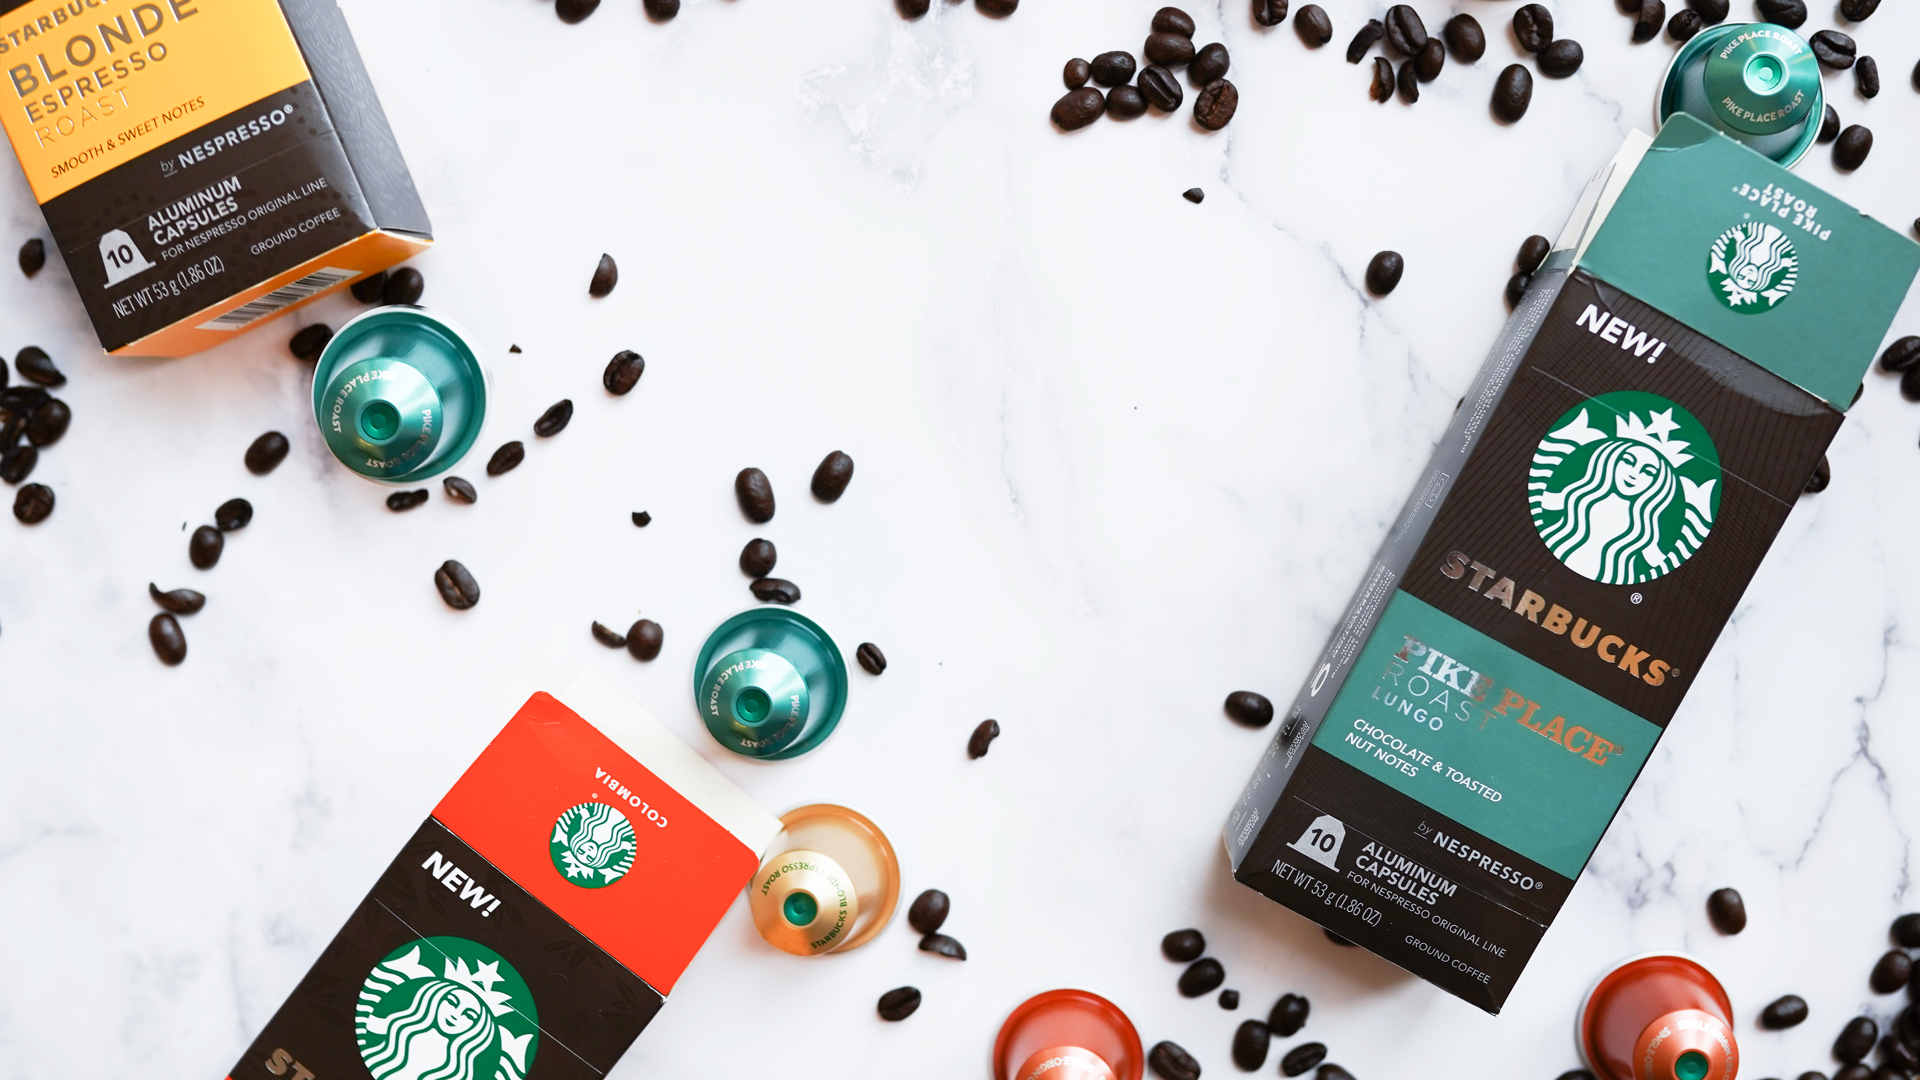 Starbucks packaging, coffee pods, and coffee beans 